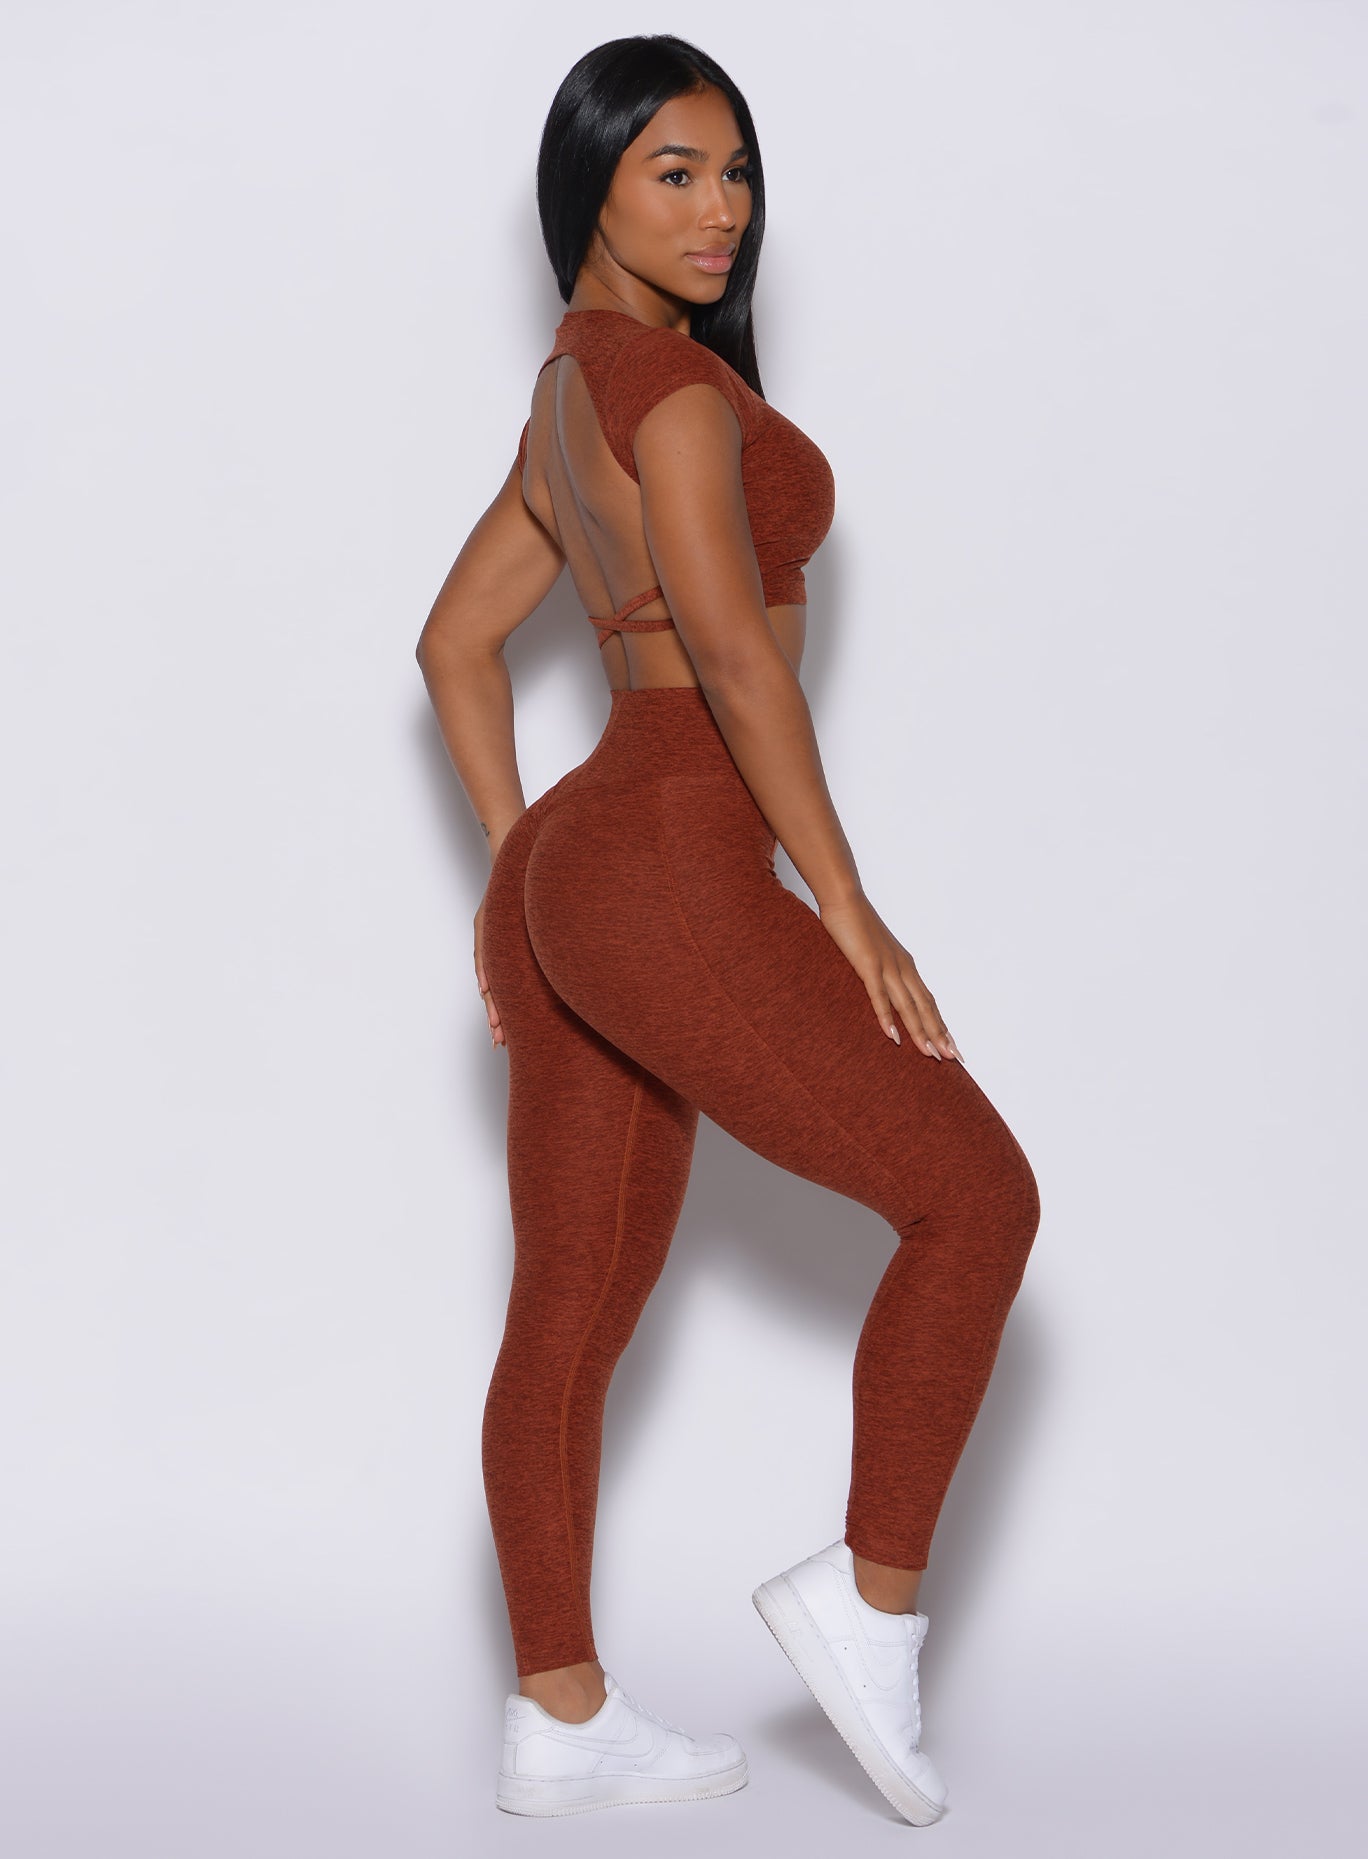 Right side profile view of a model in our cloud leggings in Cinnamon color and a matching  sports bra